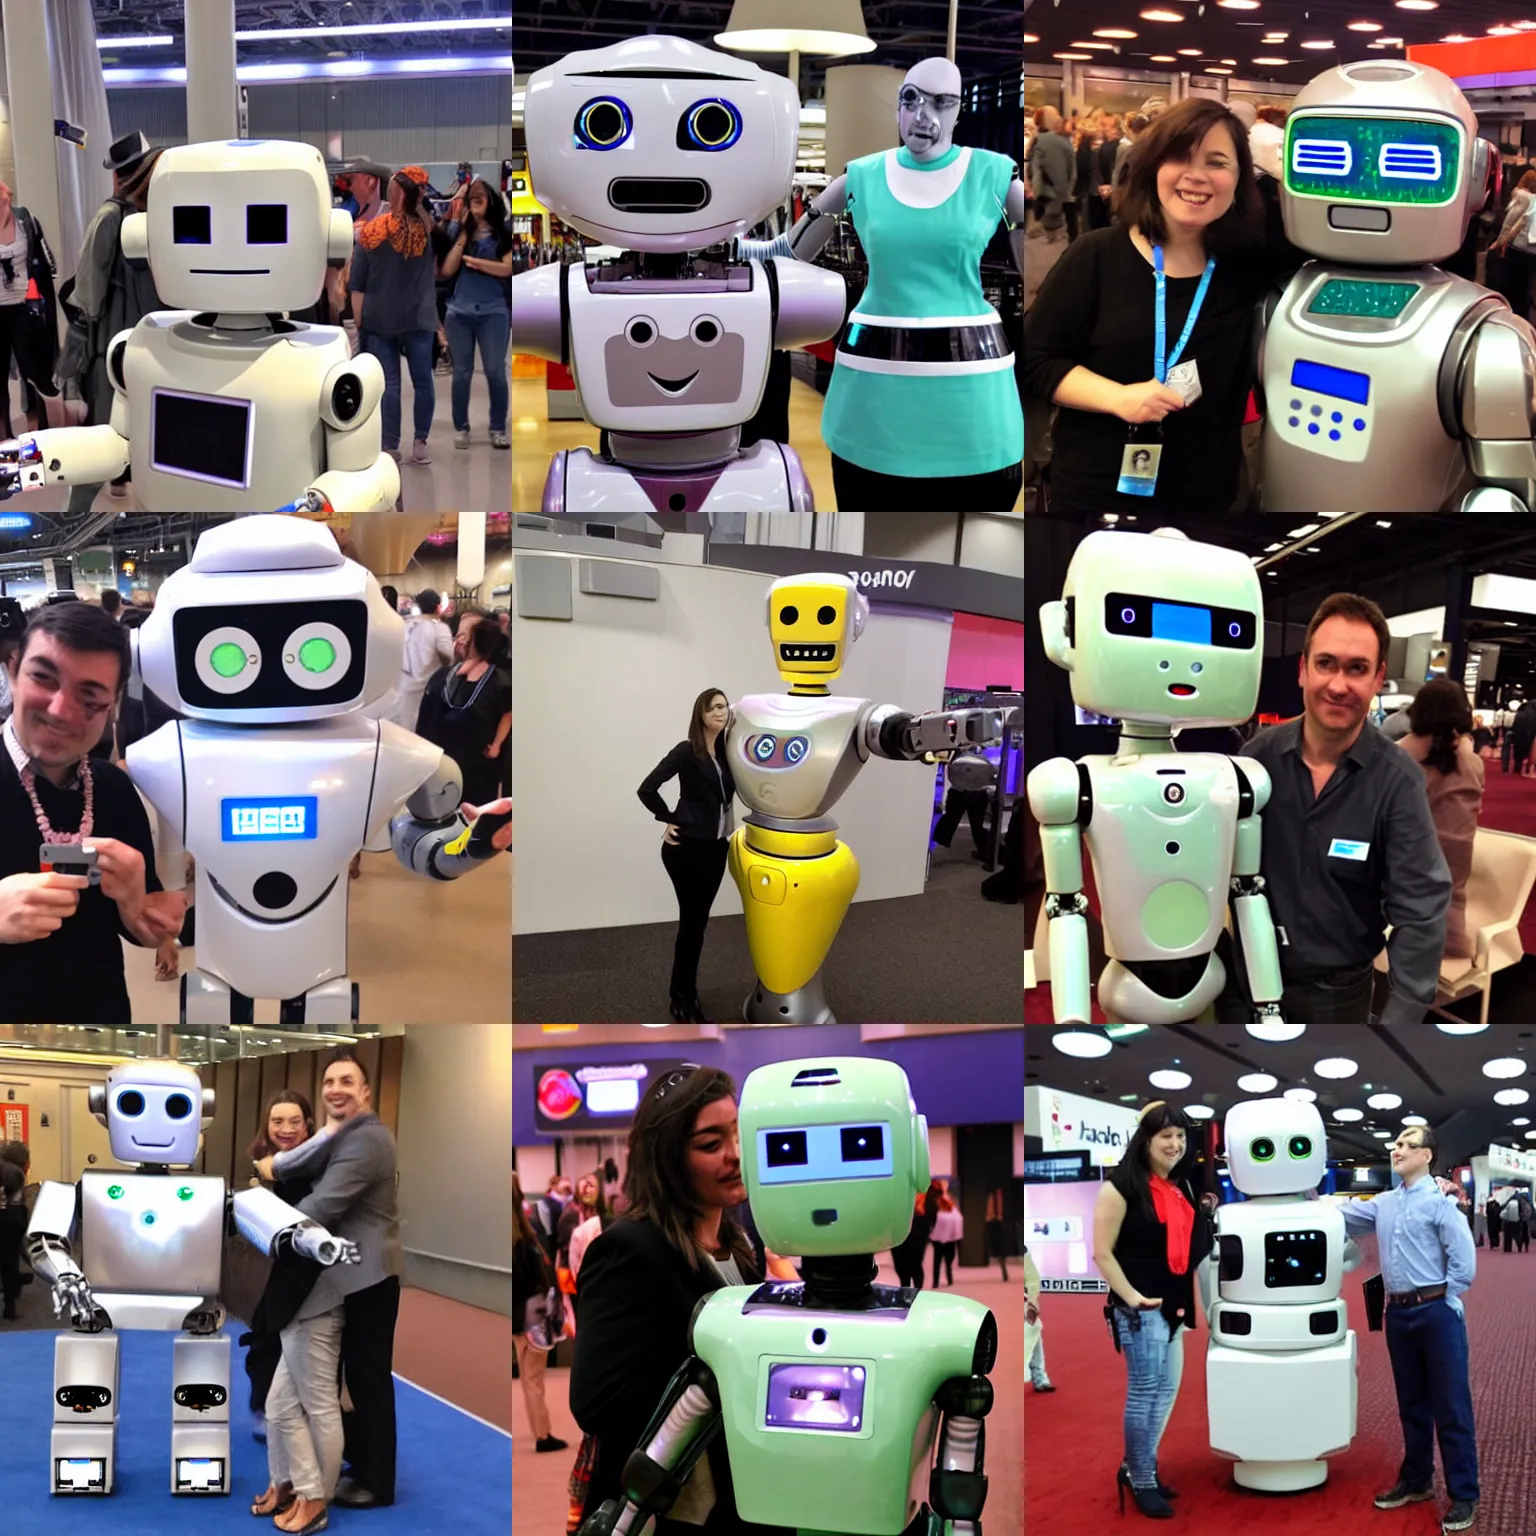 Prompt: <robot attention-grabbing type='factory defect' wants='hug now' expression='need hug' location='las vegas convention center'>selfie with an absurd robot</robot>